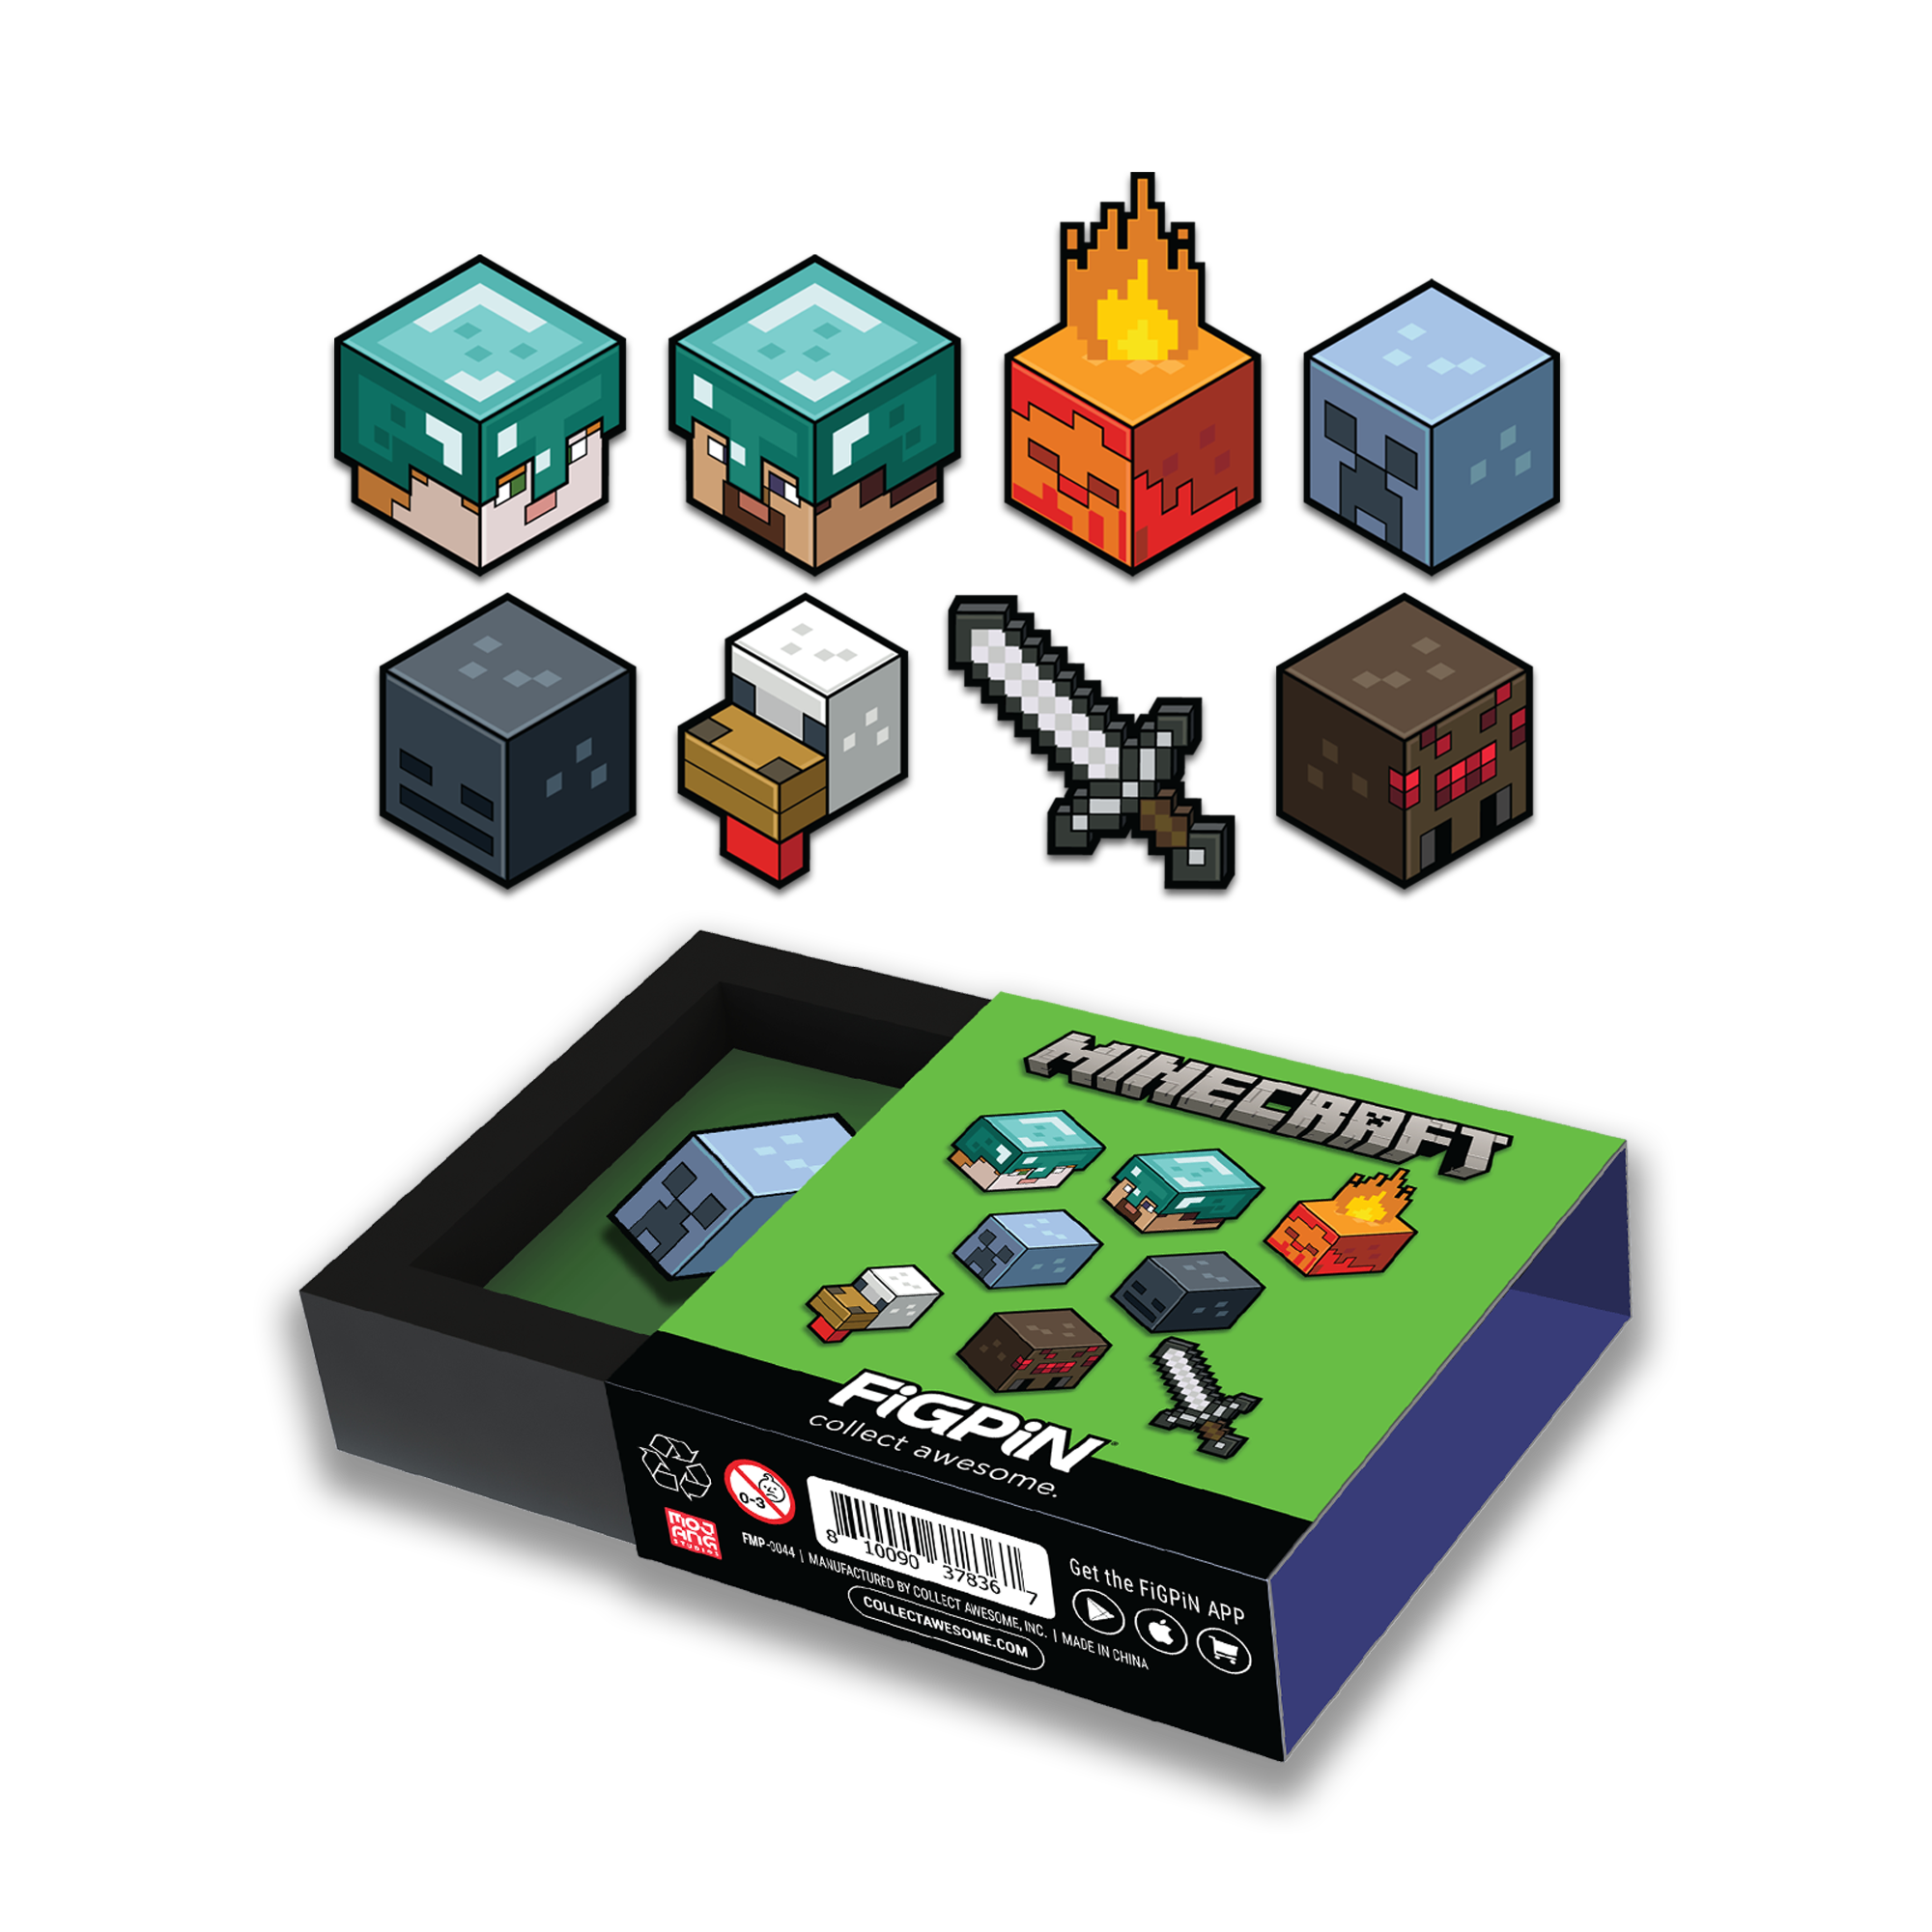 Individual Minecraft Mystery Minis blind box with 8 art renders of possible Minecraft characters above the box